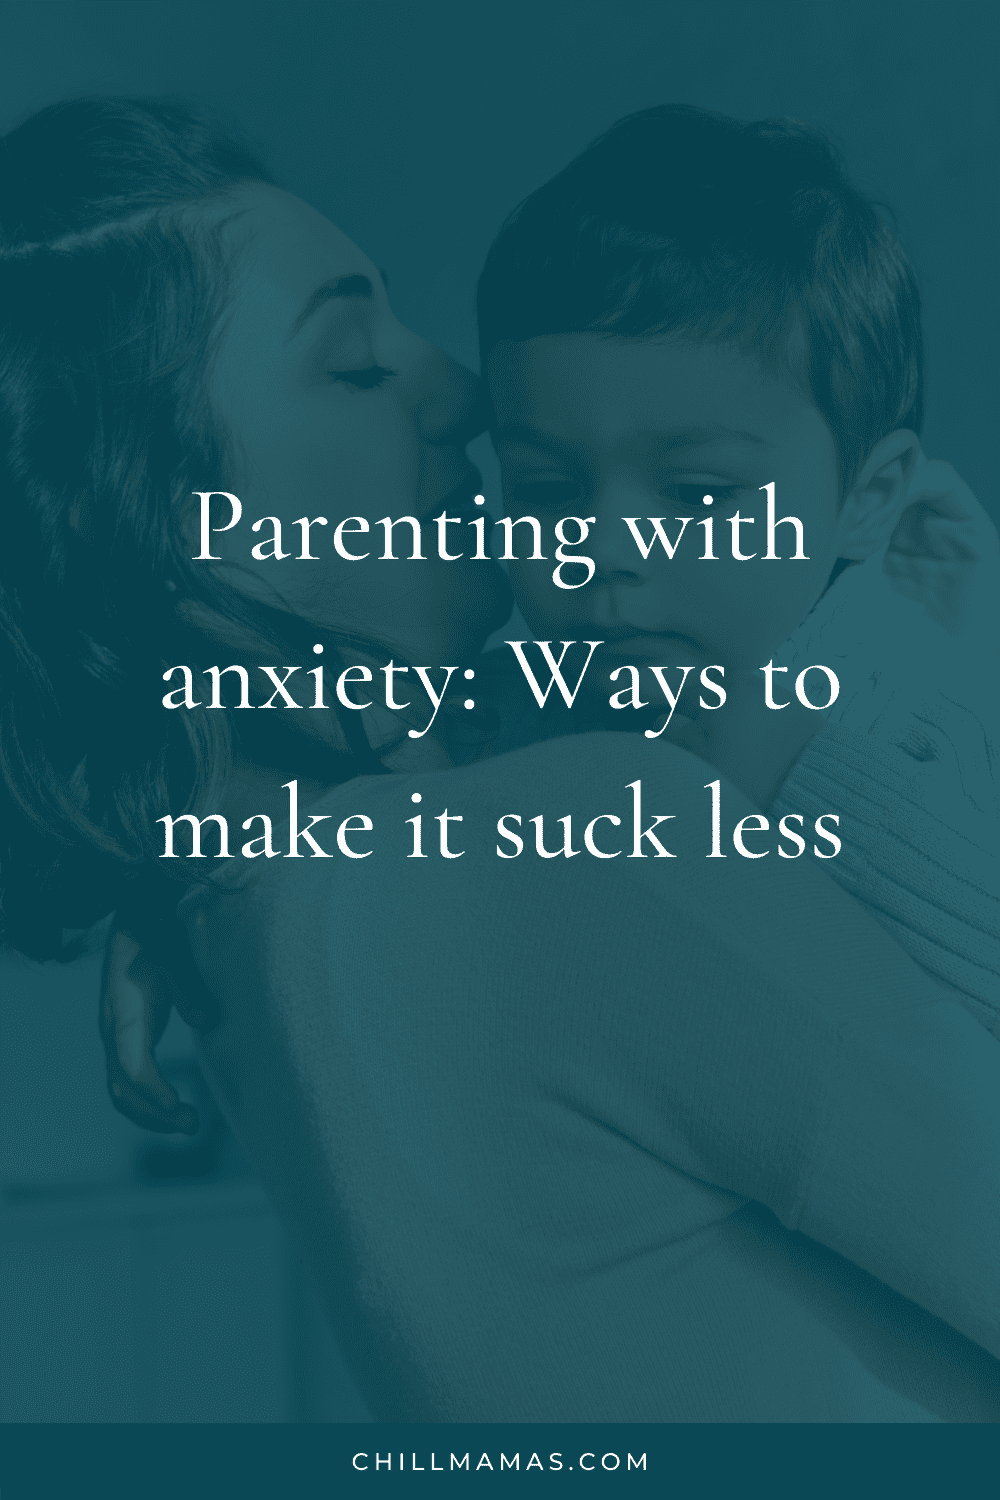 Parenting with anxiety: ways to make it suck less